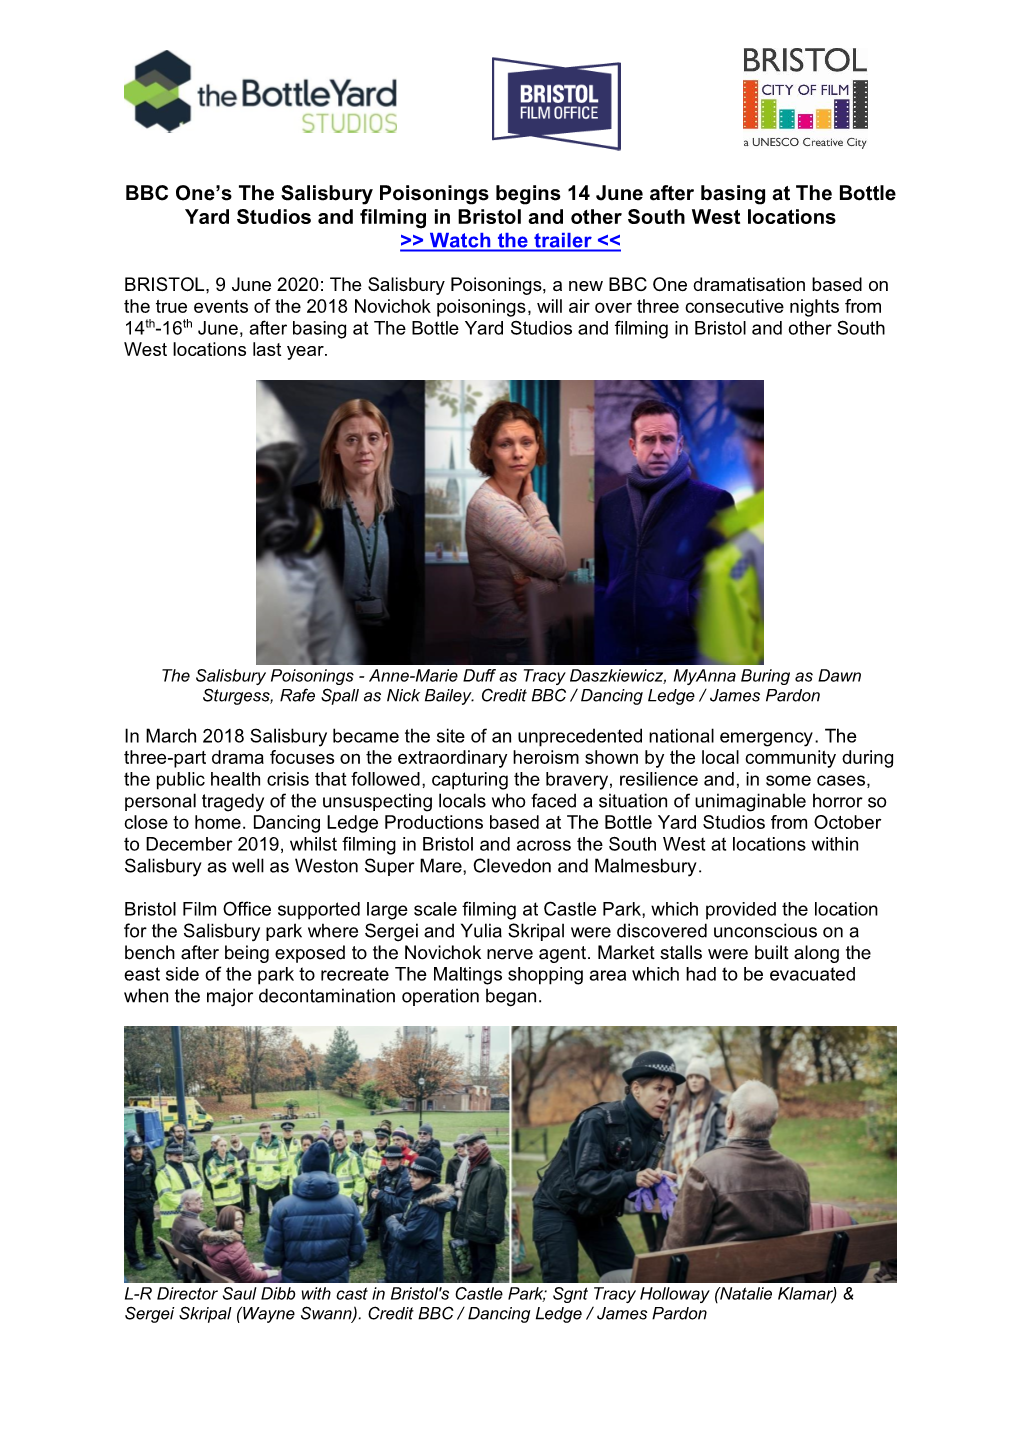 BBC One's the Salisbury Poisonings Begins 14 June After Basing at The